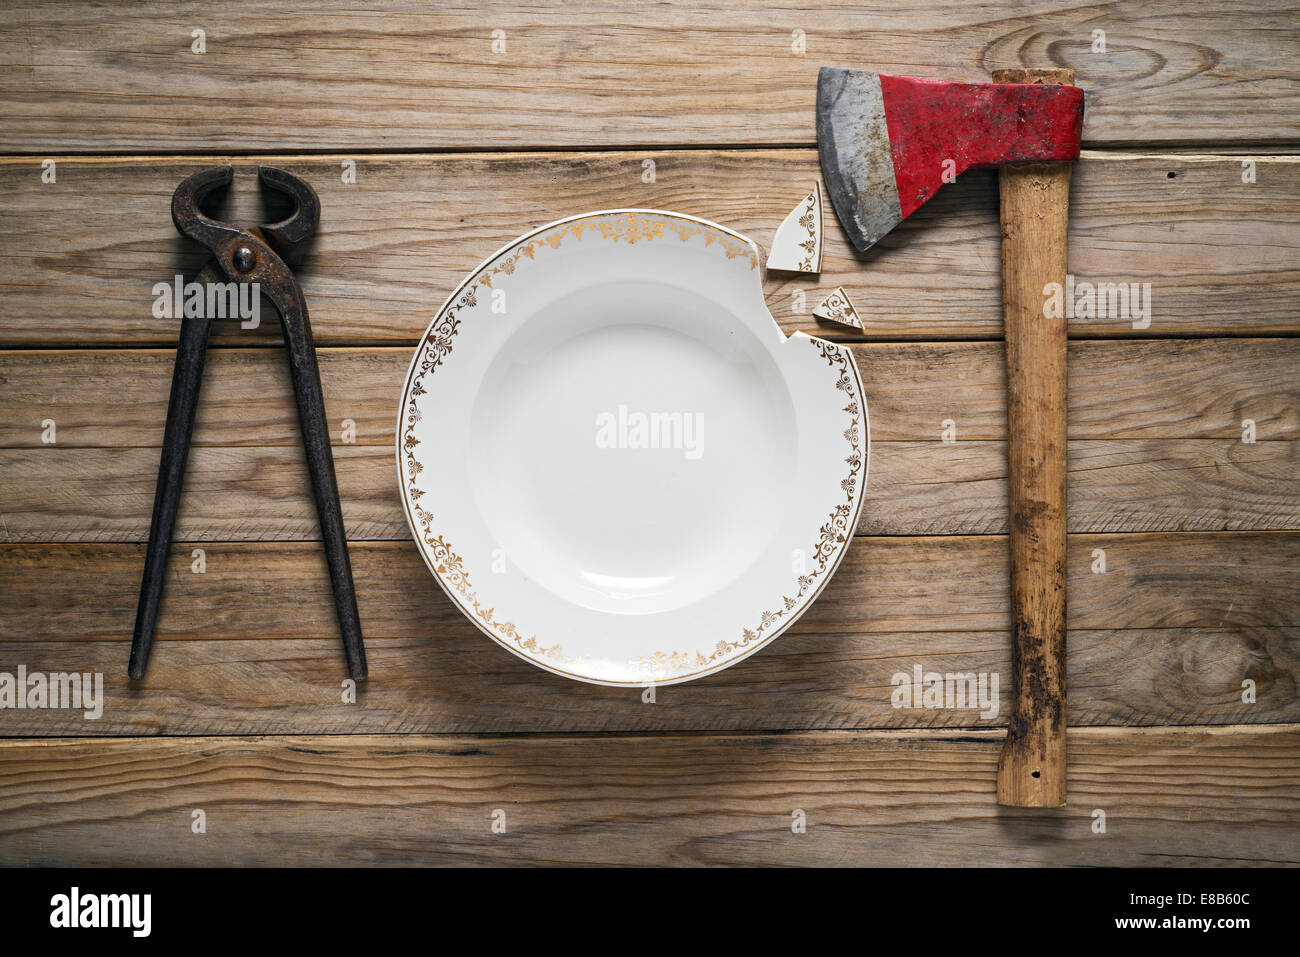 Ax and tongs as tableware Stock Photo